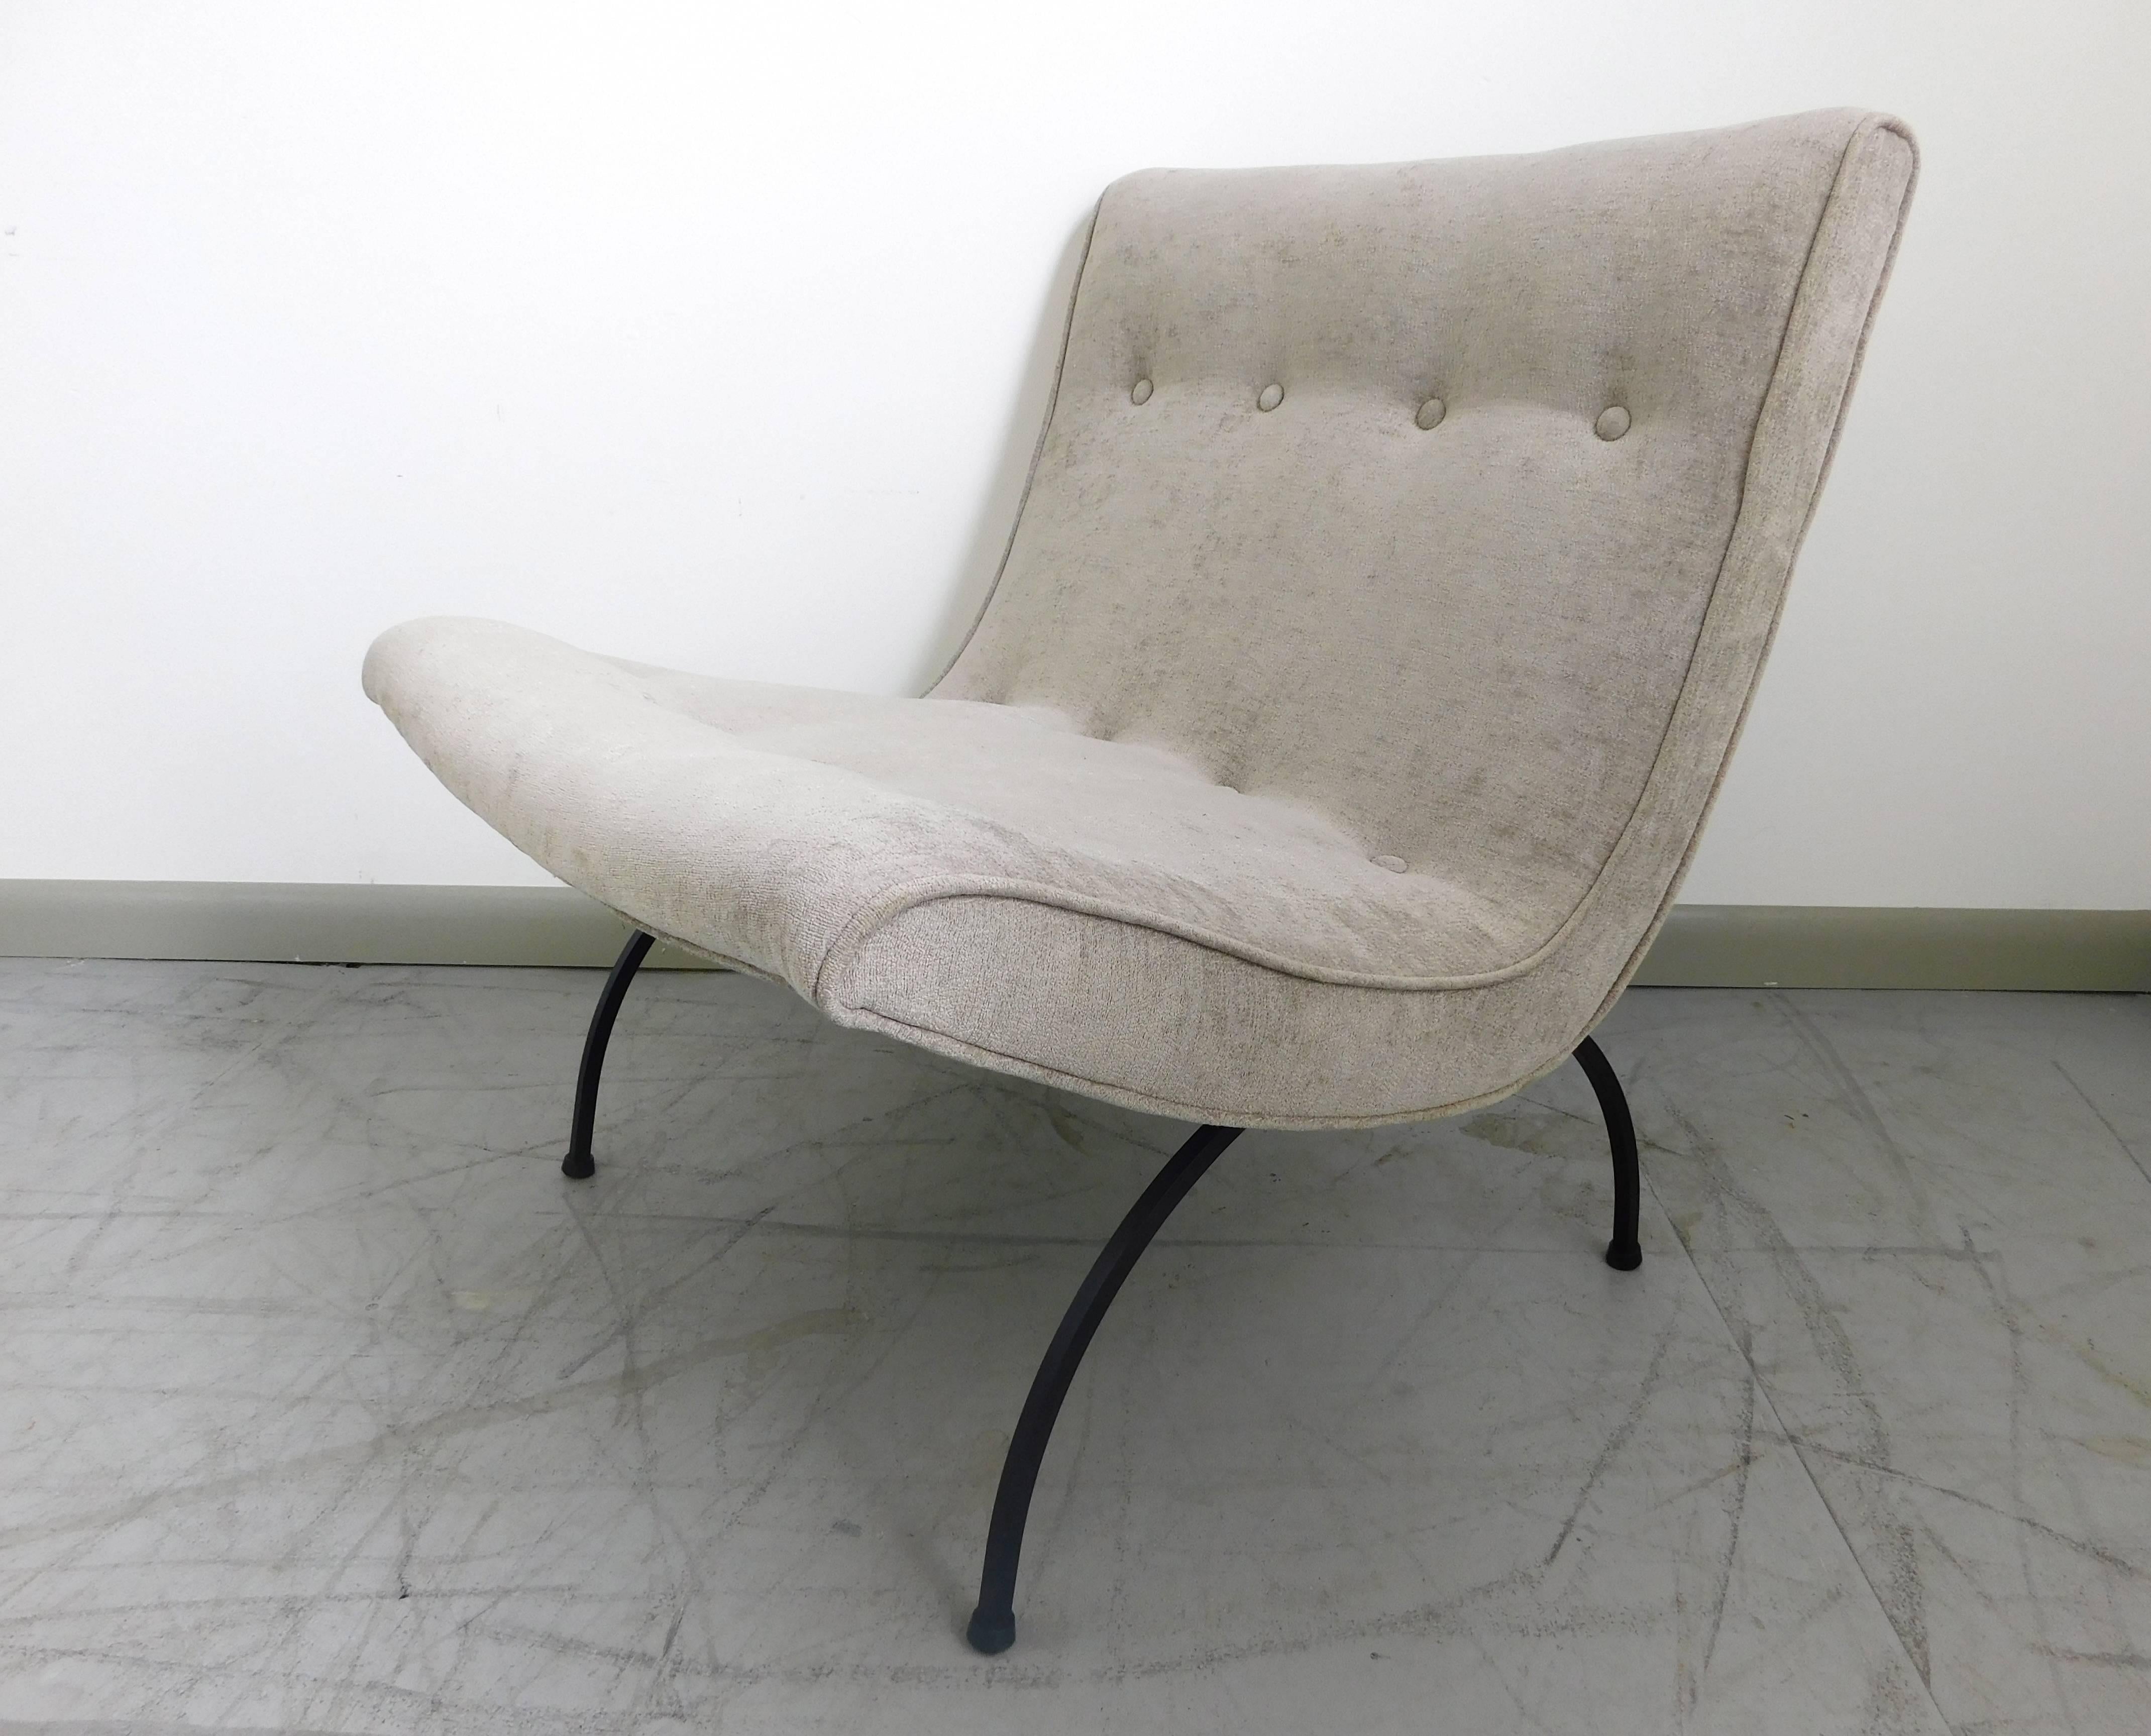 Mid-Century Modern scoop chair attributed to Milo Baughman. Freshly reupholstered in a lustrous oatmeal chenille, resting on iron legs.